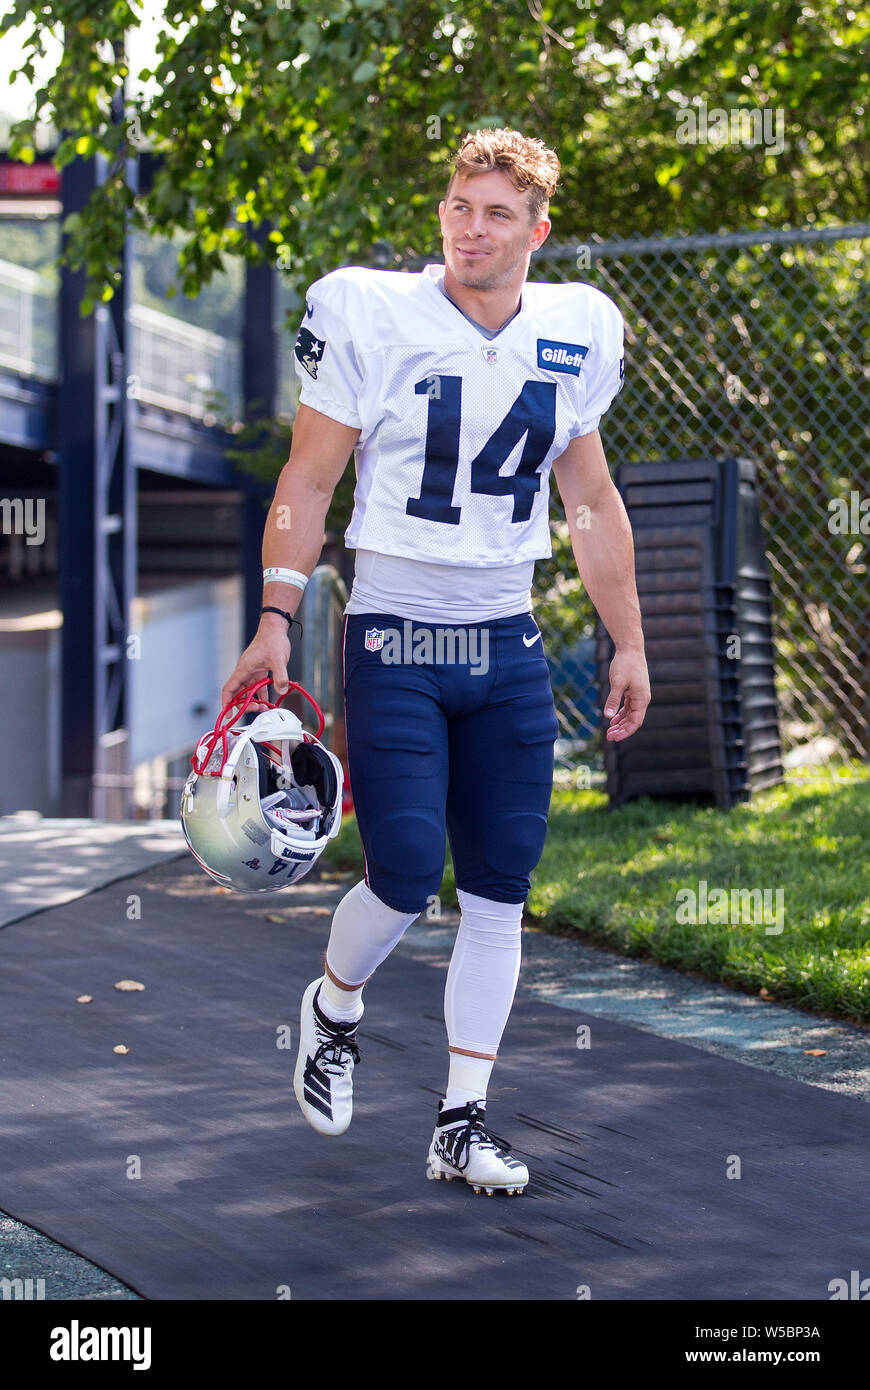 Gillette Stadium, Foxborough, USA. 27th July, 2019. MA, USA; New England Patriots wide receiver Braxton Berrios (14) walks to the field during training camp at Gillette Stadium, Foxborough, USA. Anthony Nesmith/CSM/Alamy Live News Stock Photo